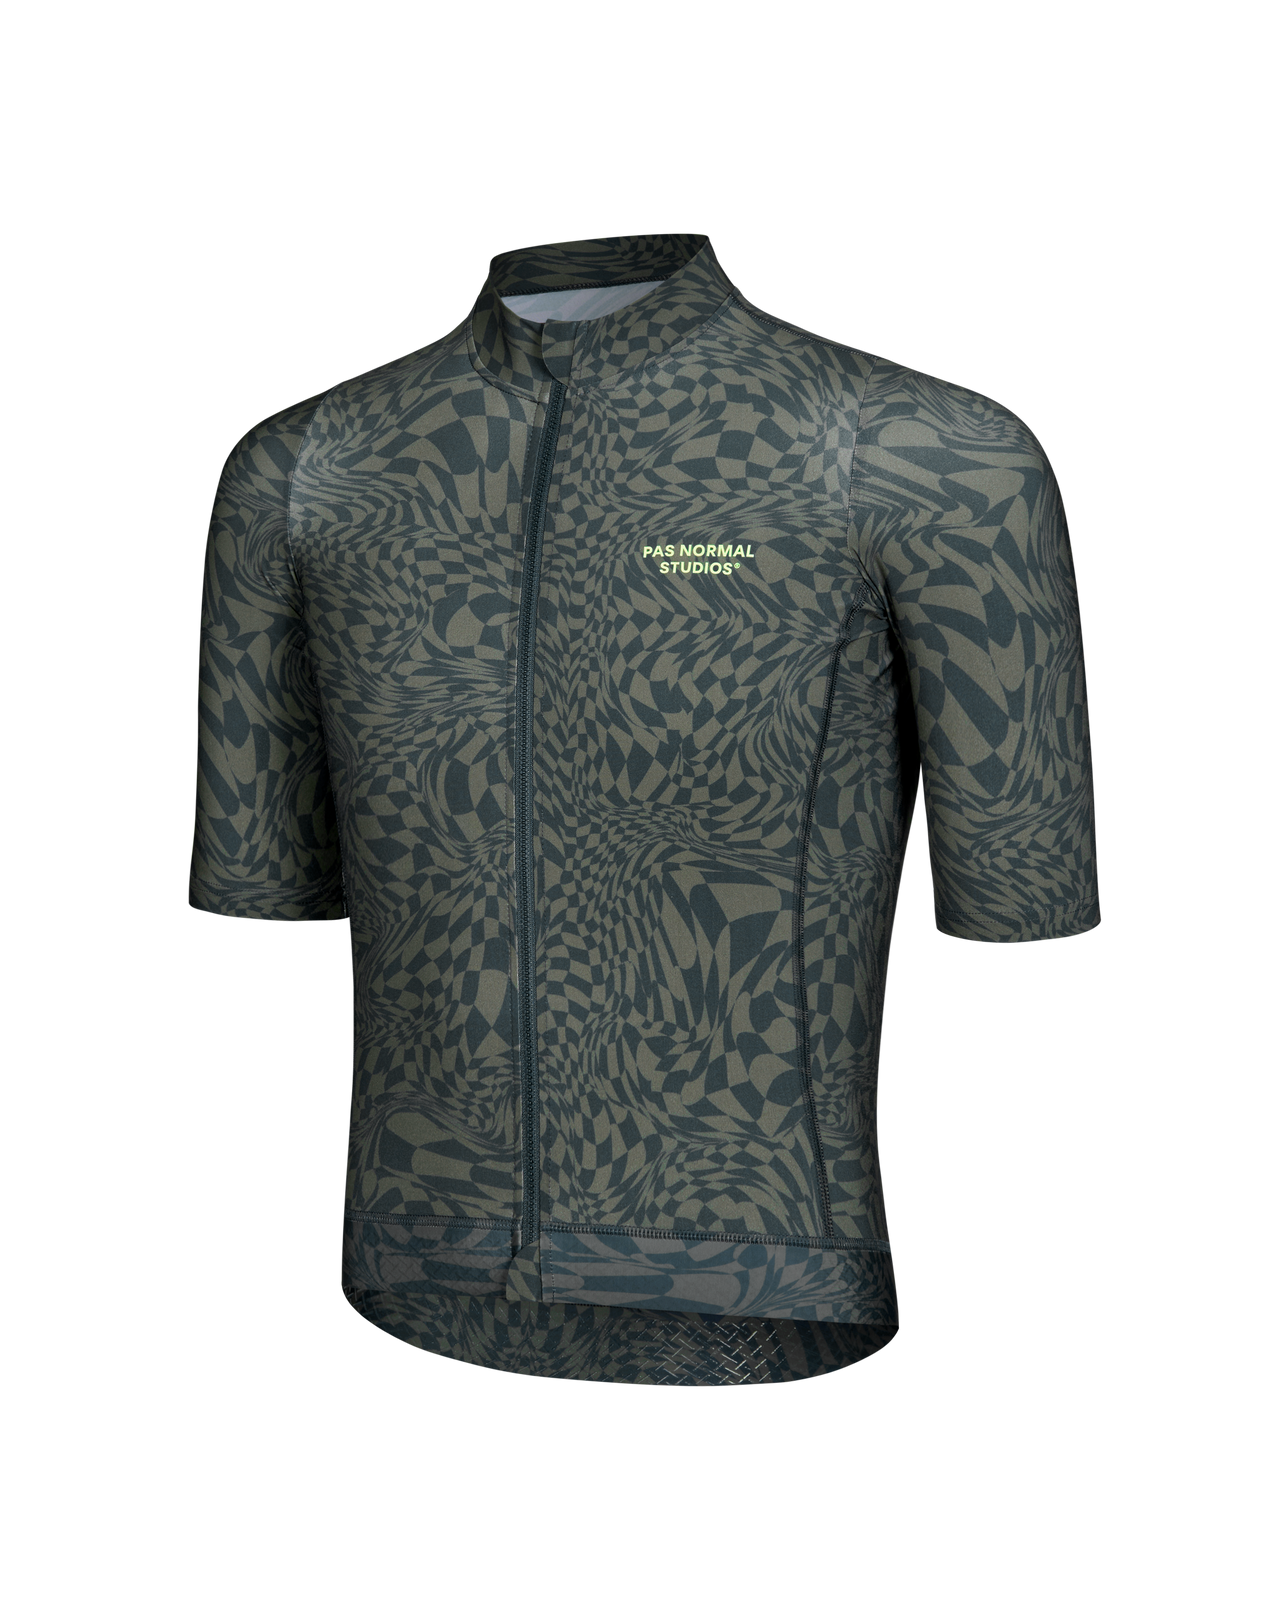 Men's Essential Jersey - Check Olive Green